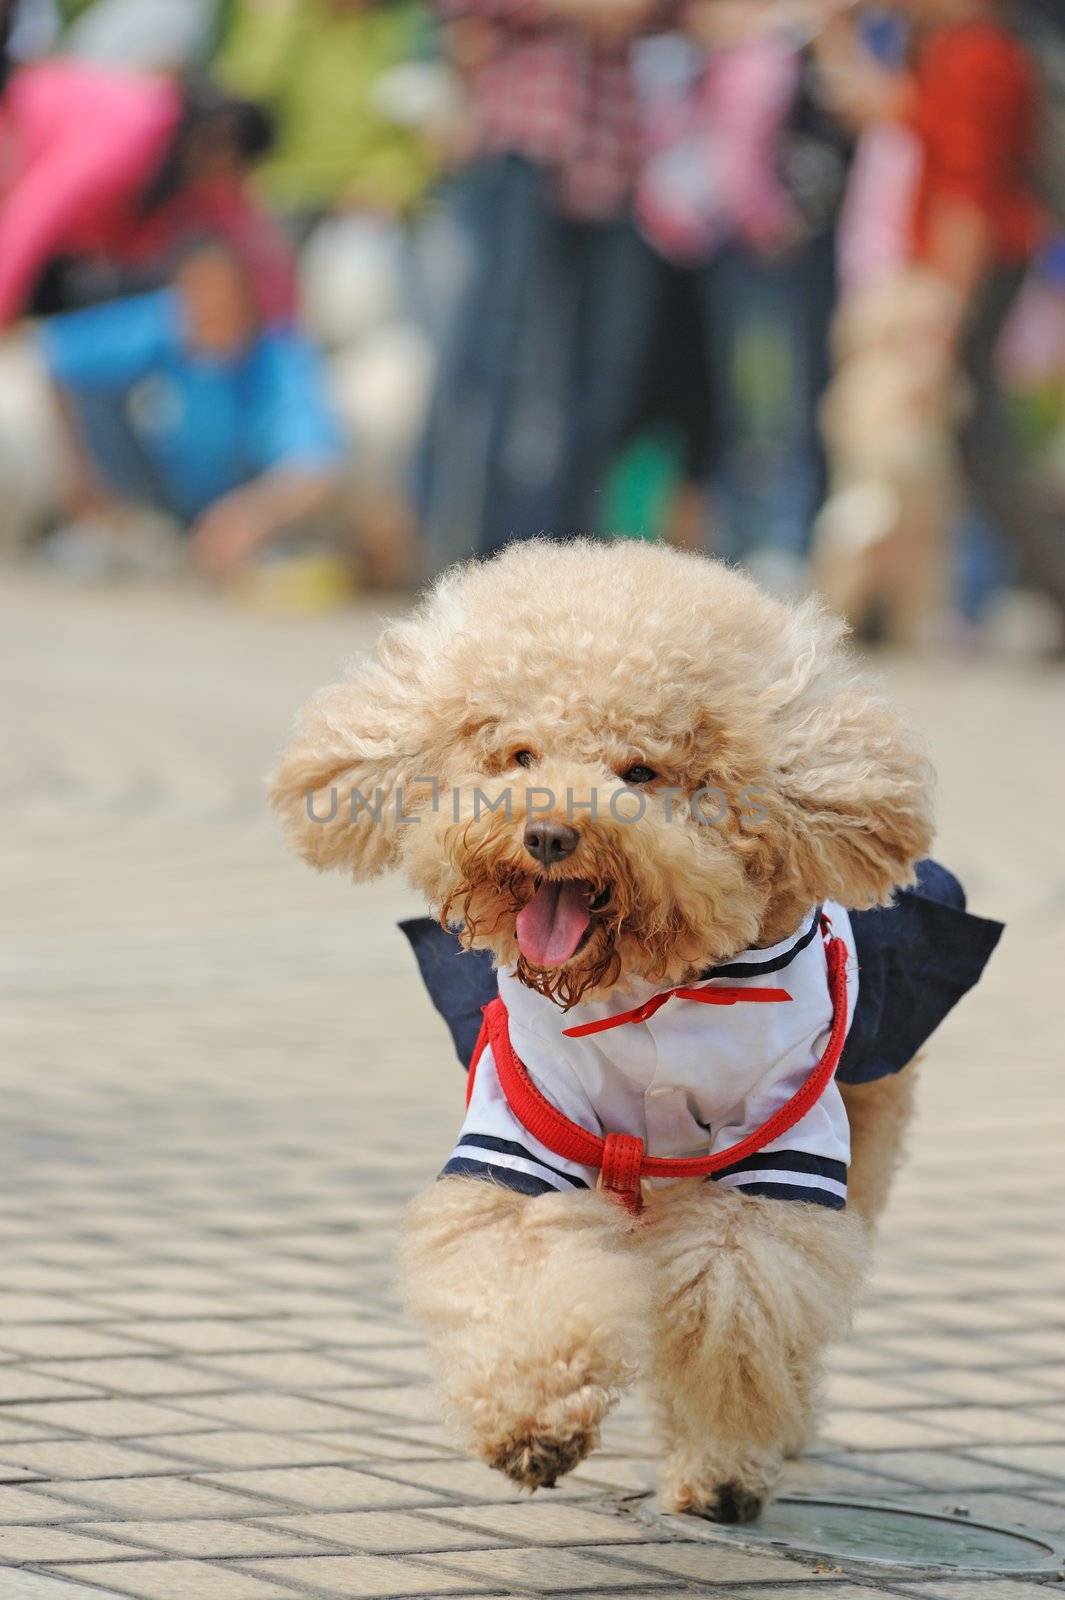 Little poodle dog running on the ground